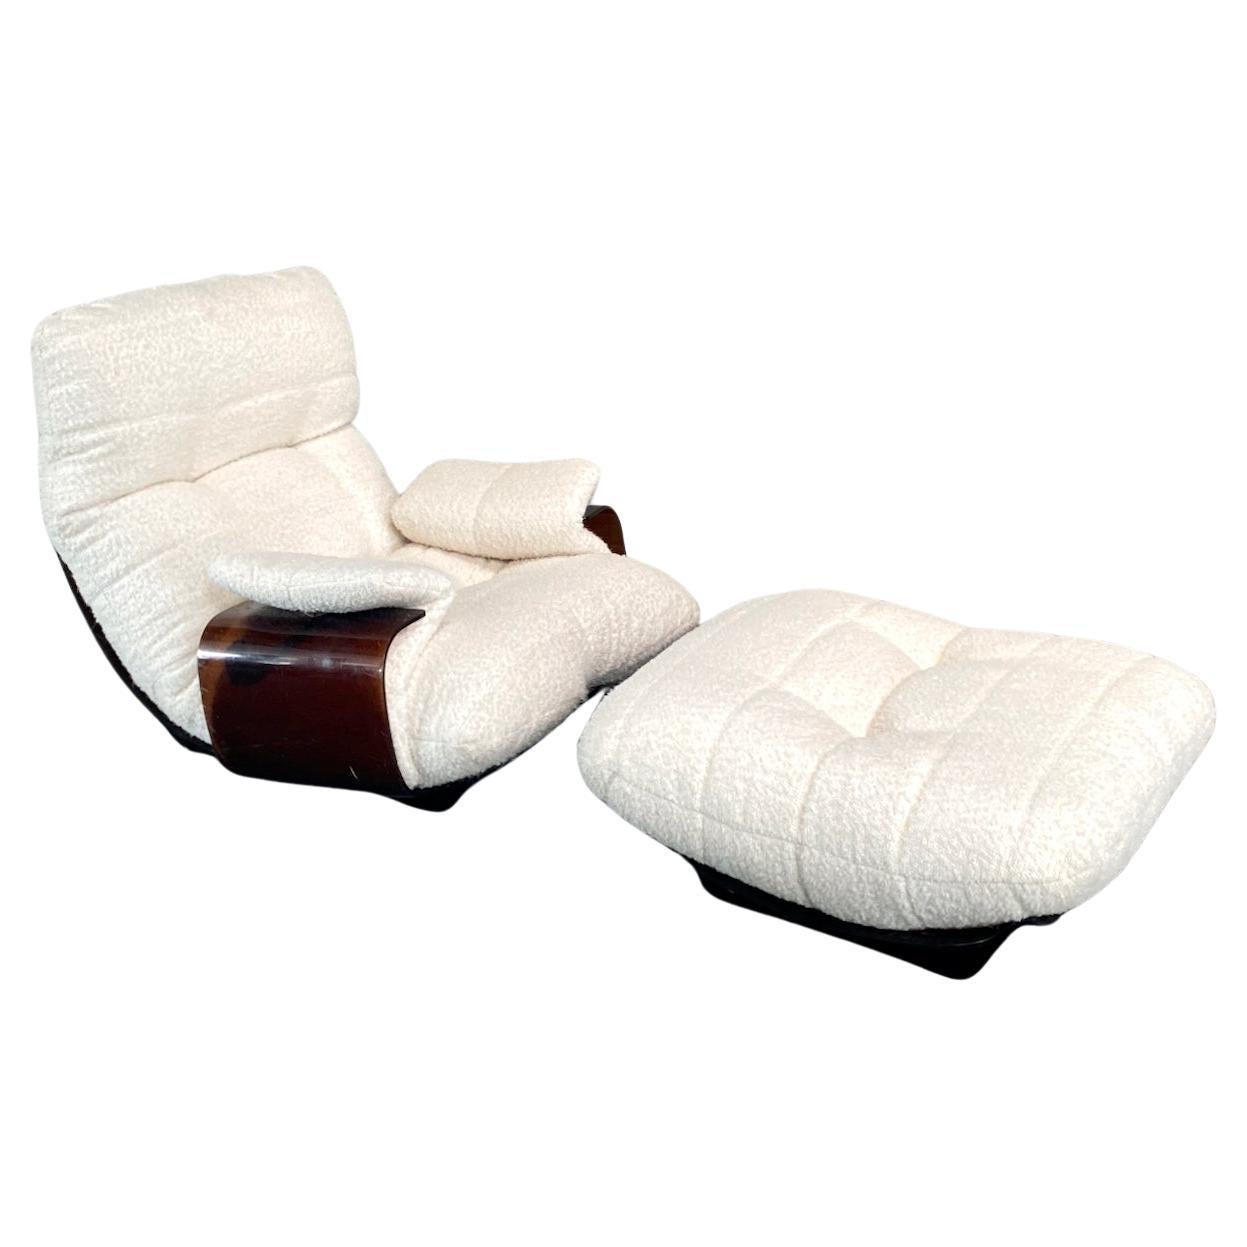 Marsala lounge chair with ottoman by Michel Ducaroy for Ligne Roset, 1970's